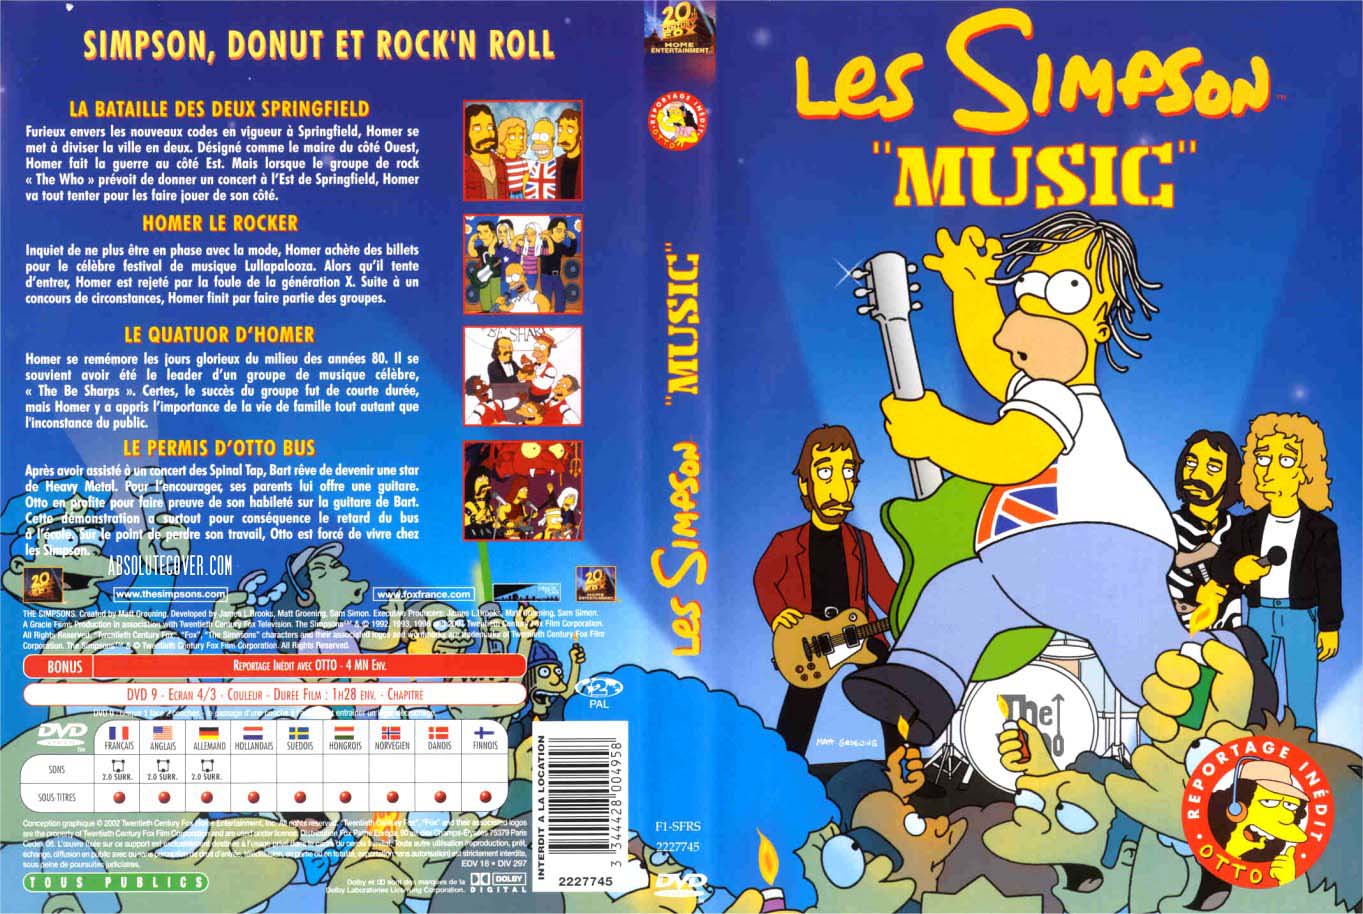 The Simpsons music